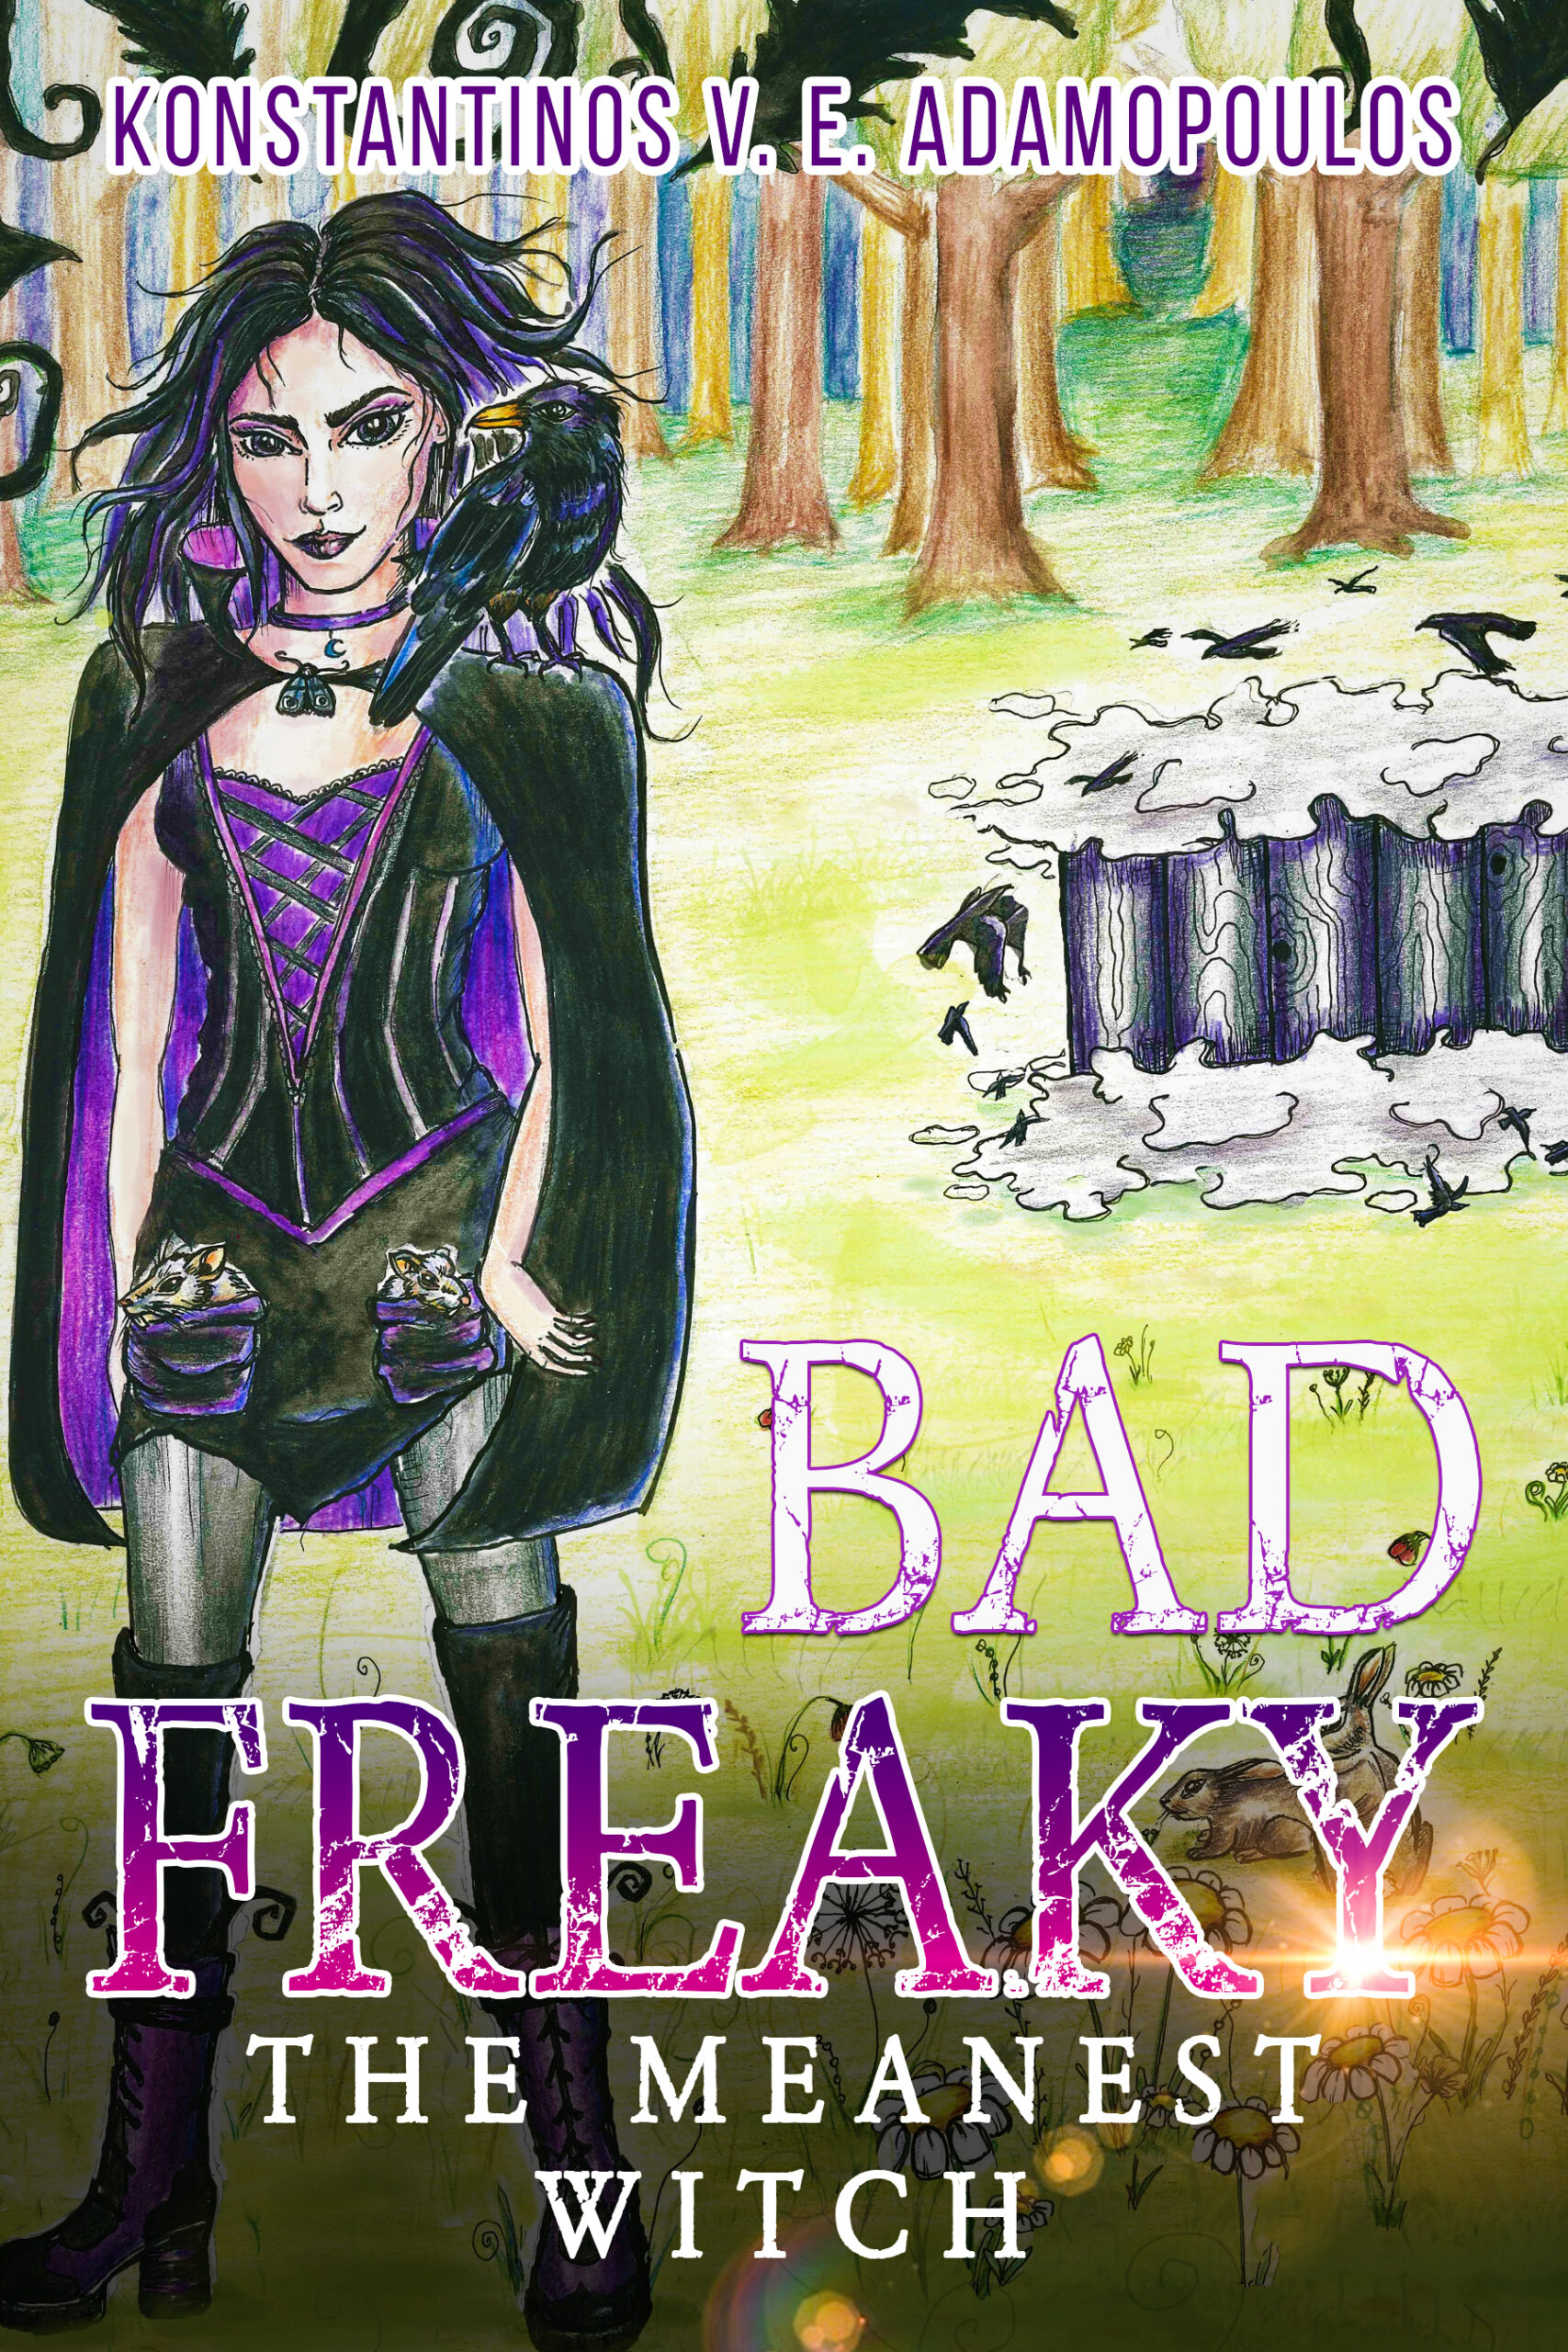 FREE: Badfreaky – The meanest witch by Konstantinos V. E. Adamopoulos